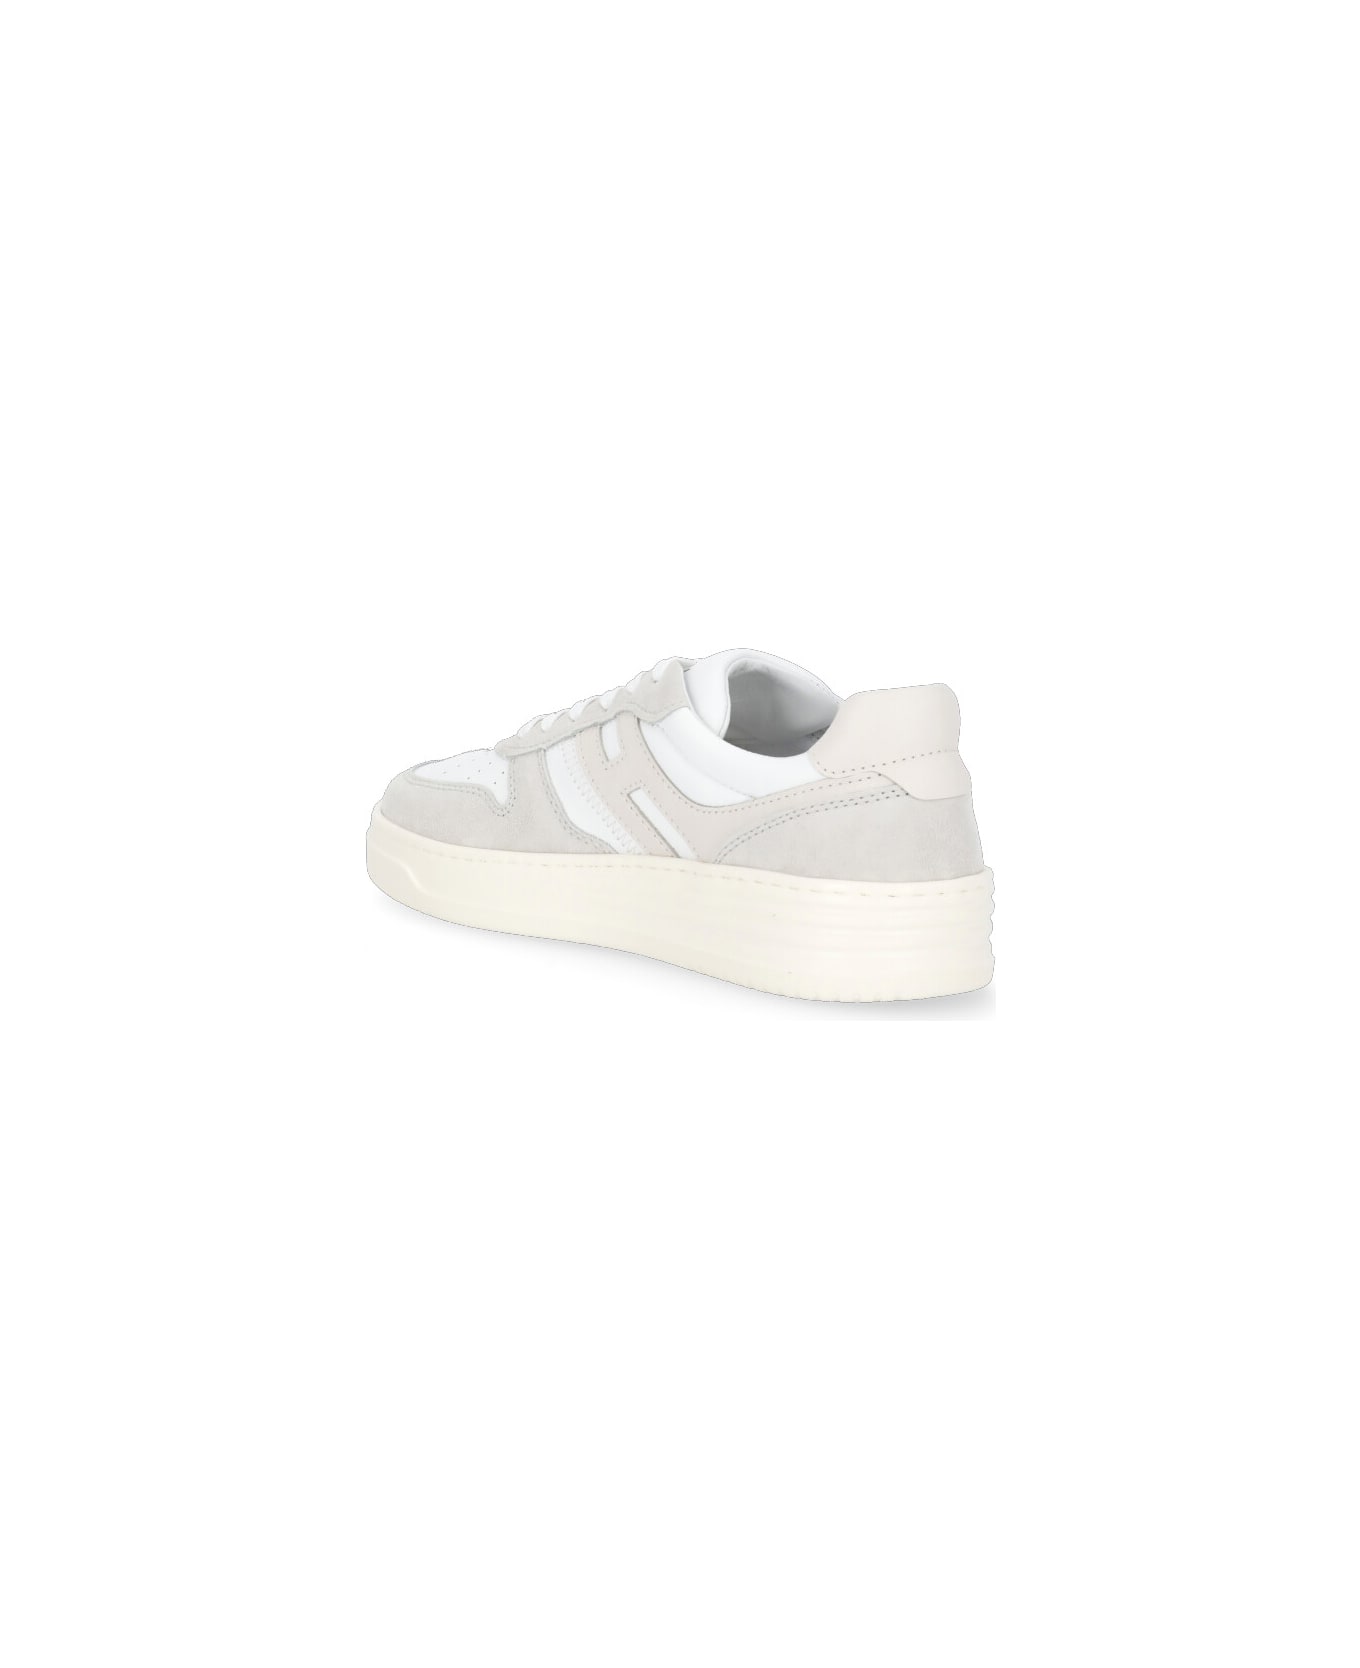 Hogan Sneakers "h630" Made Of Leather - Beige